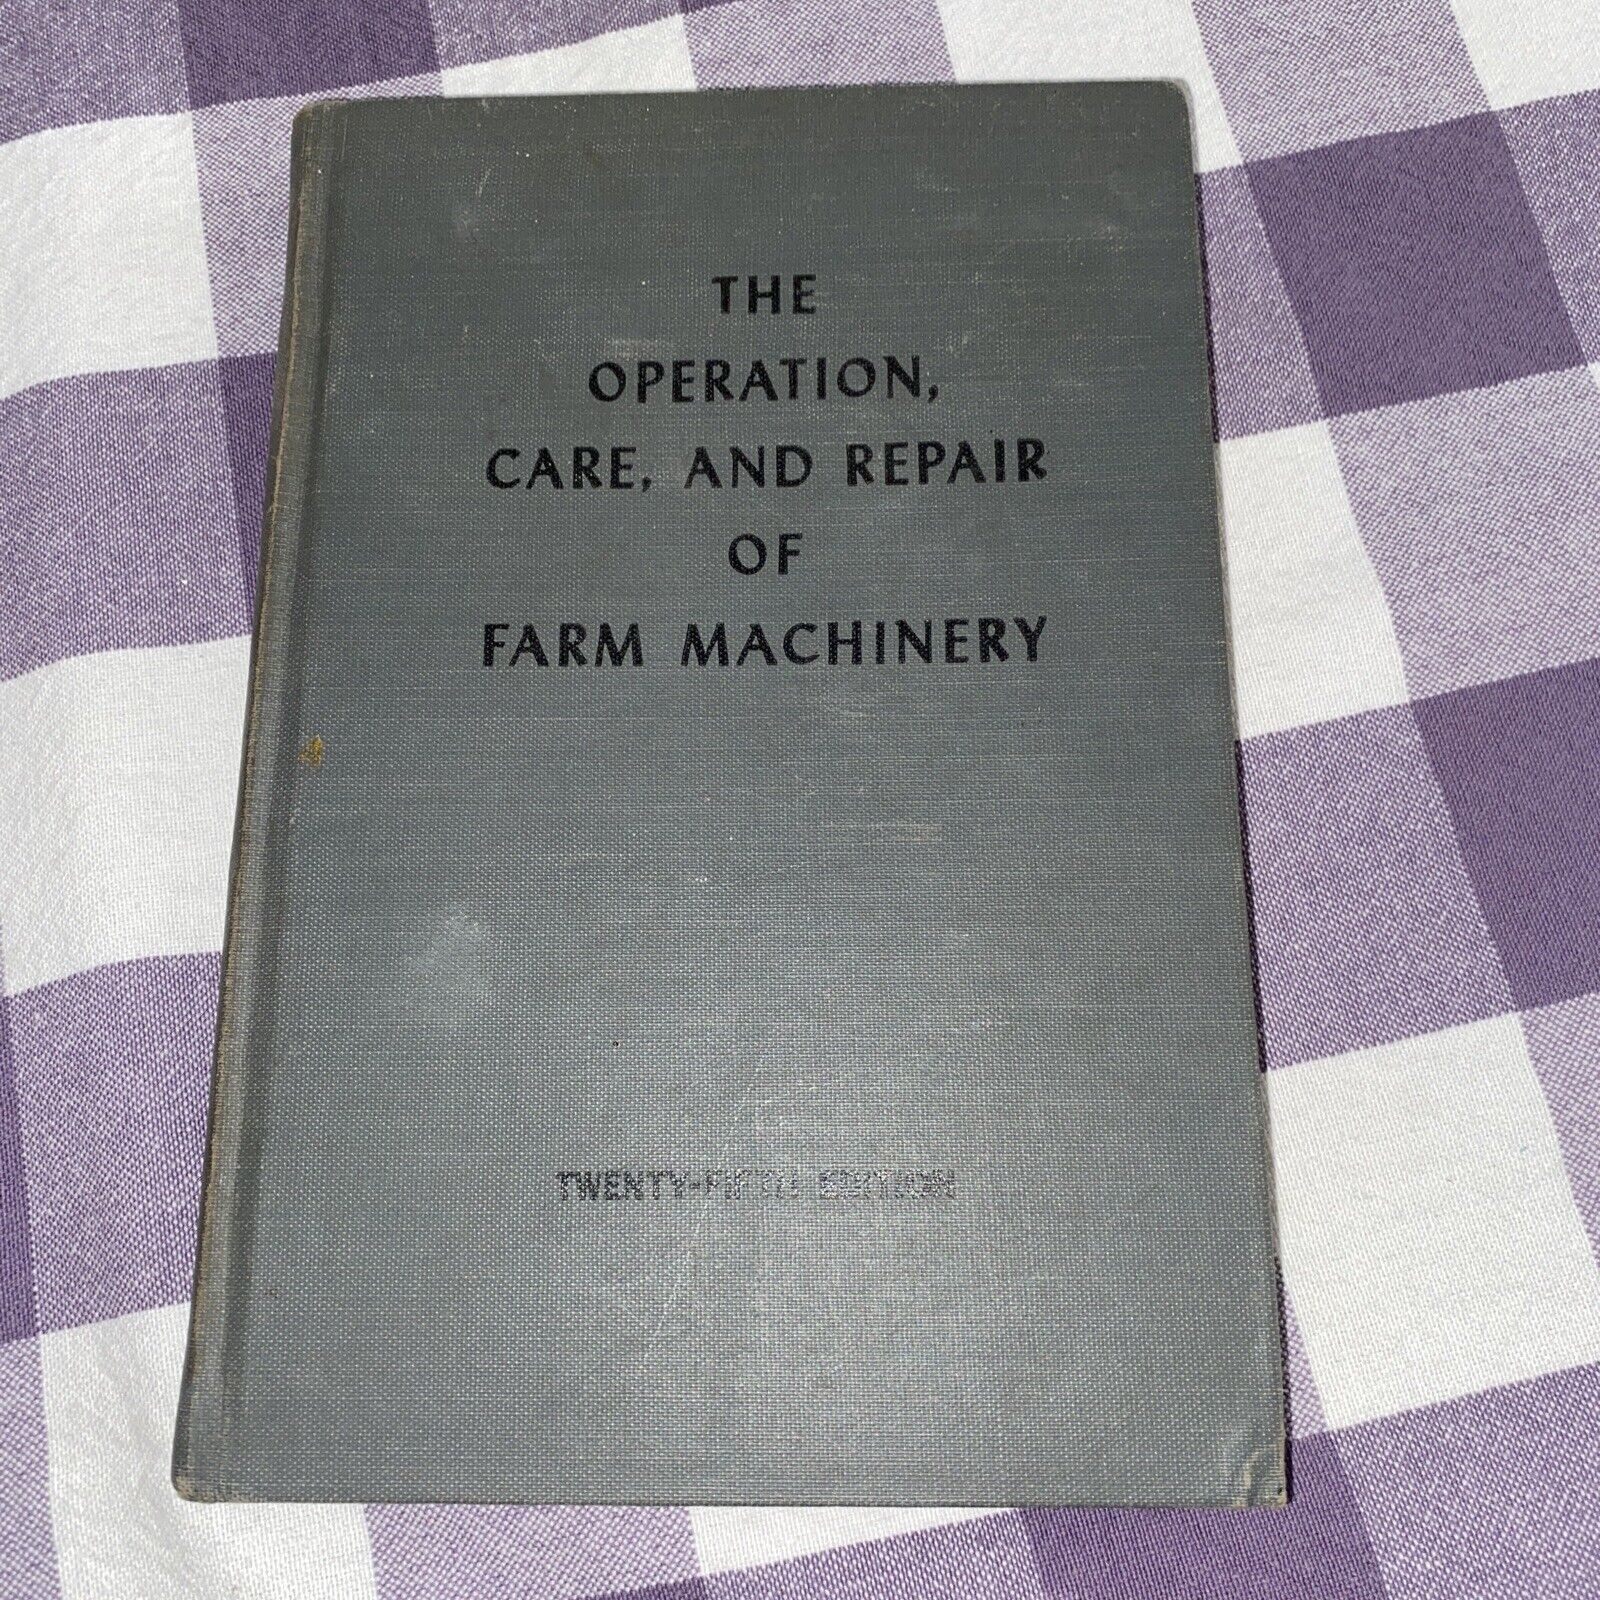 #2) The Operation, Care and Repair of Farm Machinery - John Deere 25th Edition 